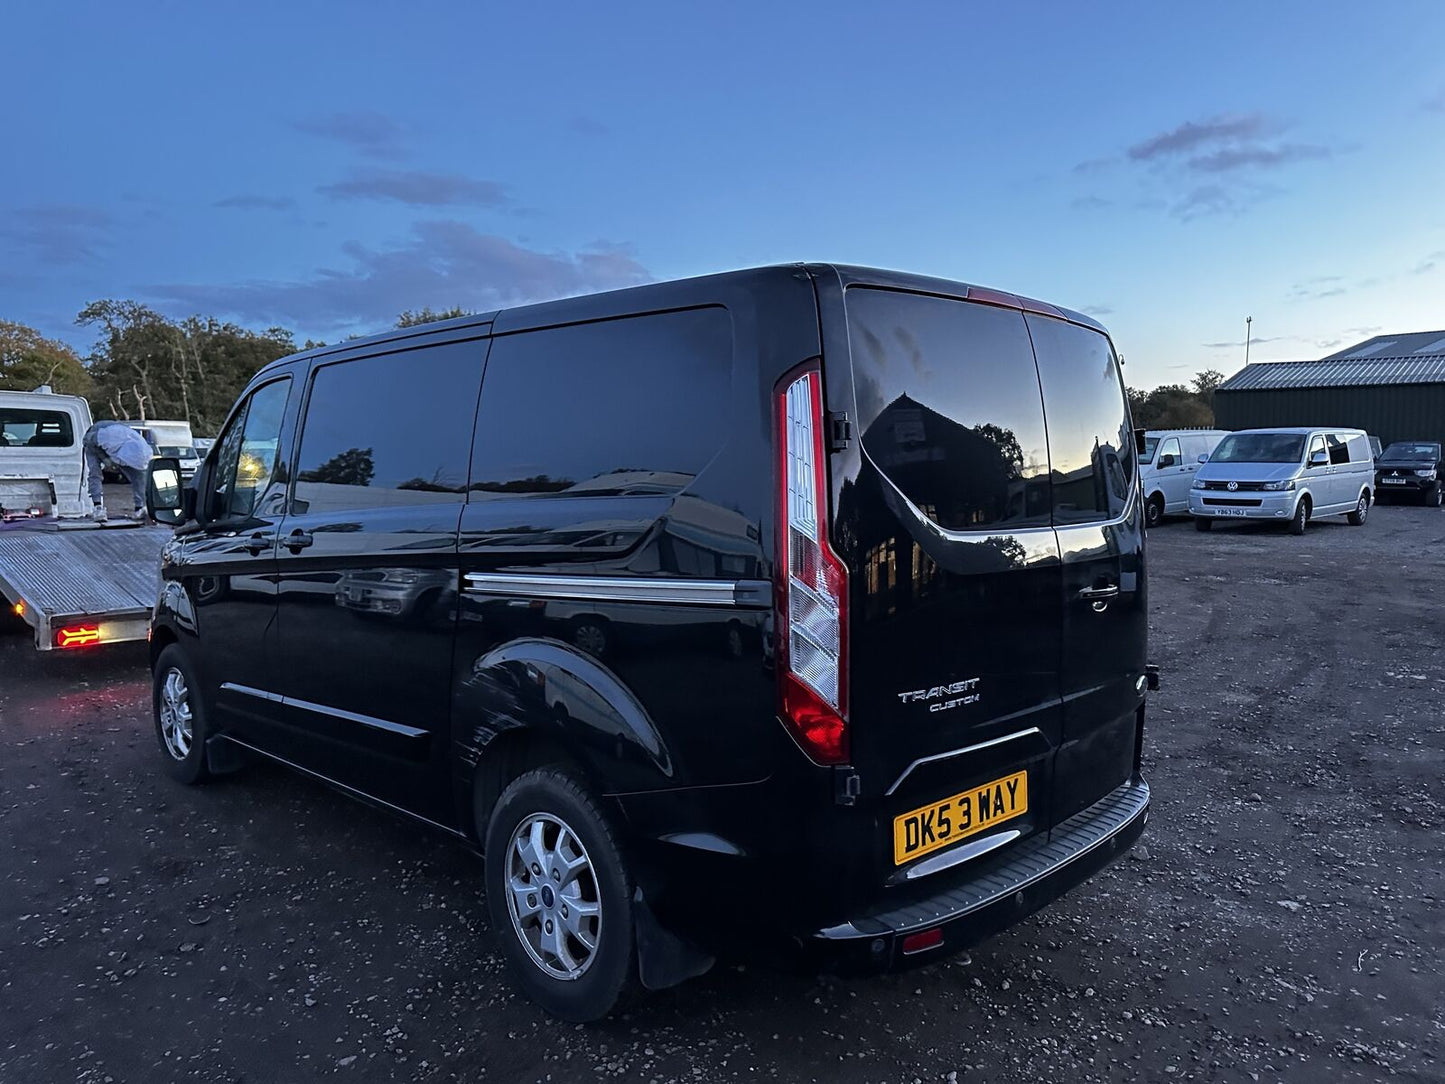 Bid on **(ONLY 92K MILEAGE)** 53 PLATE BLACK BEAUTY'S QUEST: TRANSIT MOT: JAN 2024 - NO VAT ON HAMMER- Buy &amp; Sell on Auction with EAMA Group